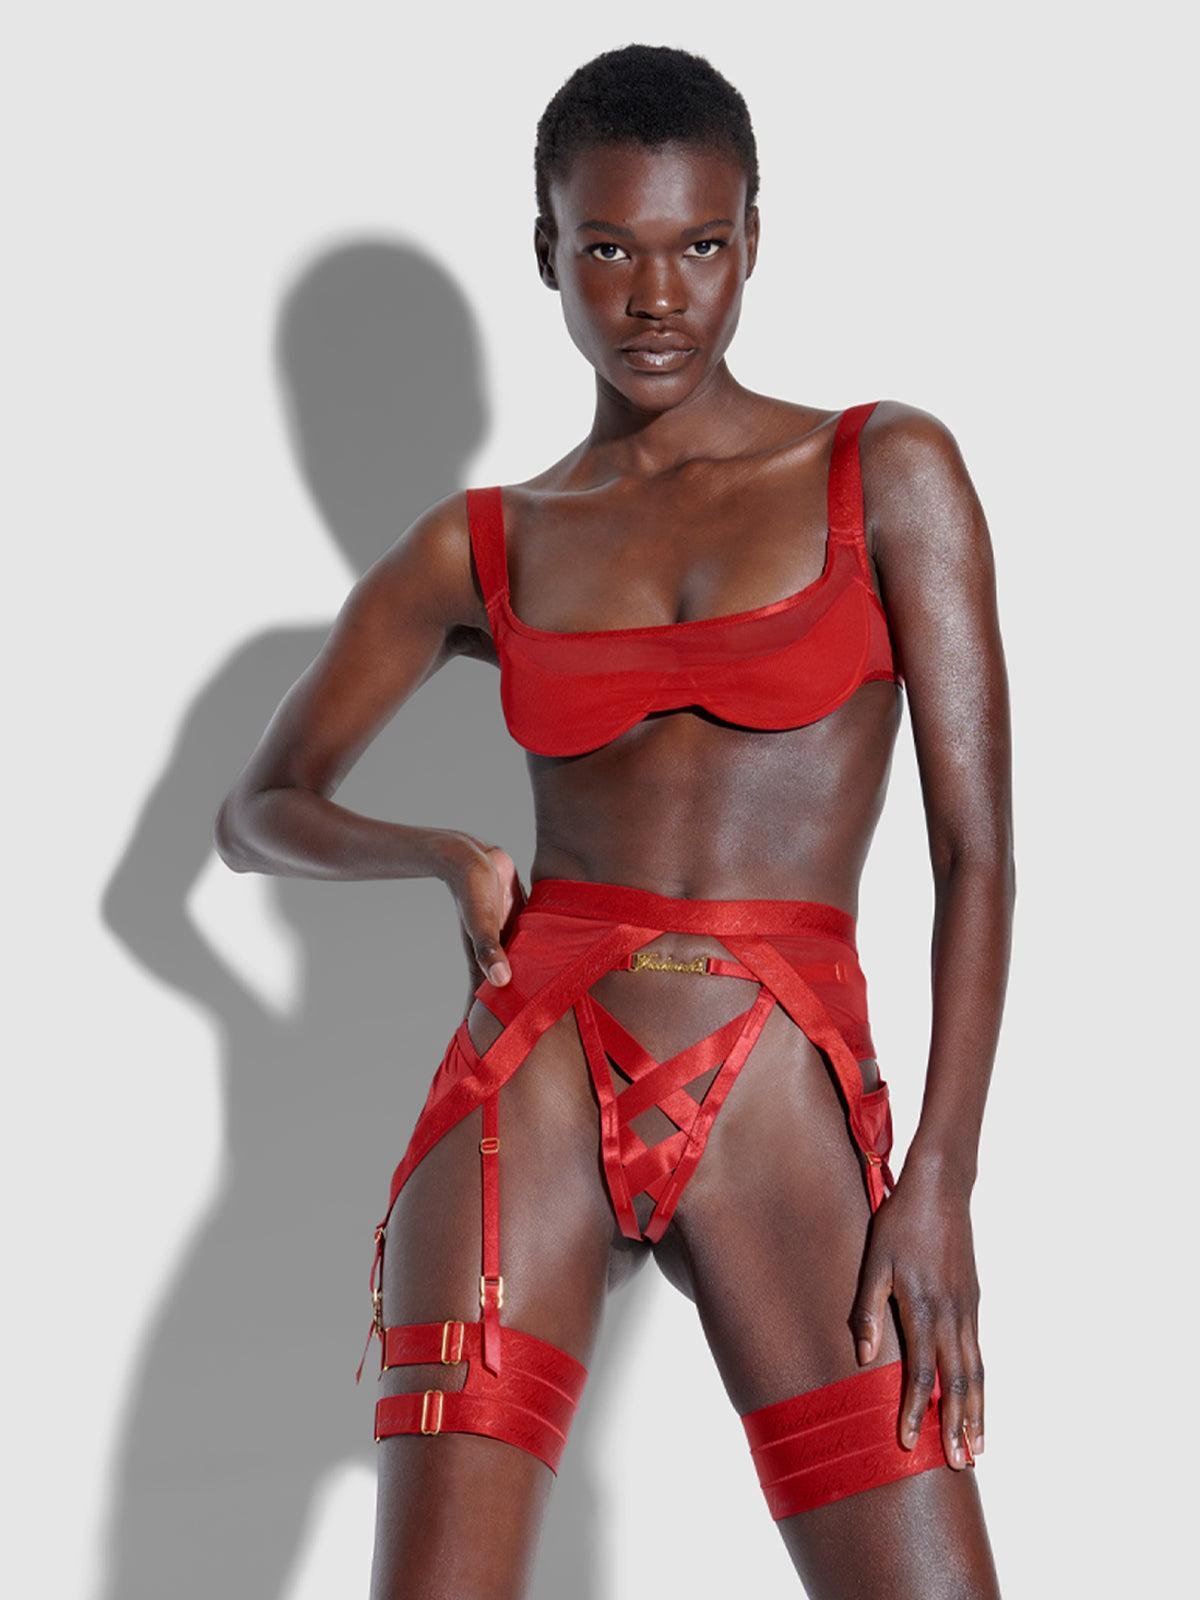 Raven Convertible Garter Belt in Crimson Red by FREDERICK'S OF HOLLYWOOD